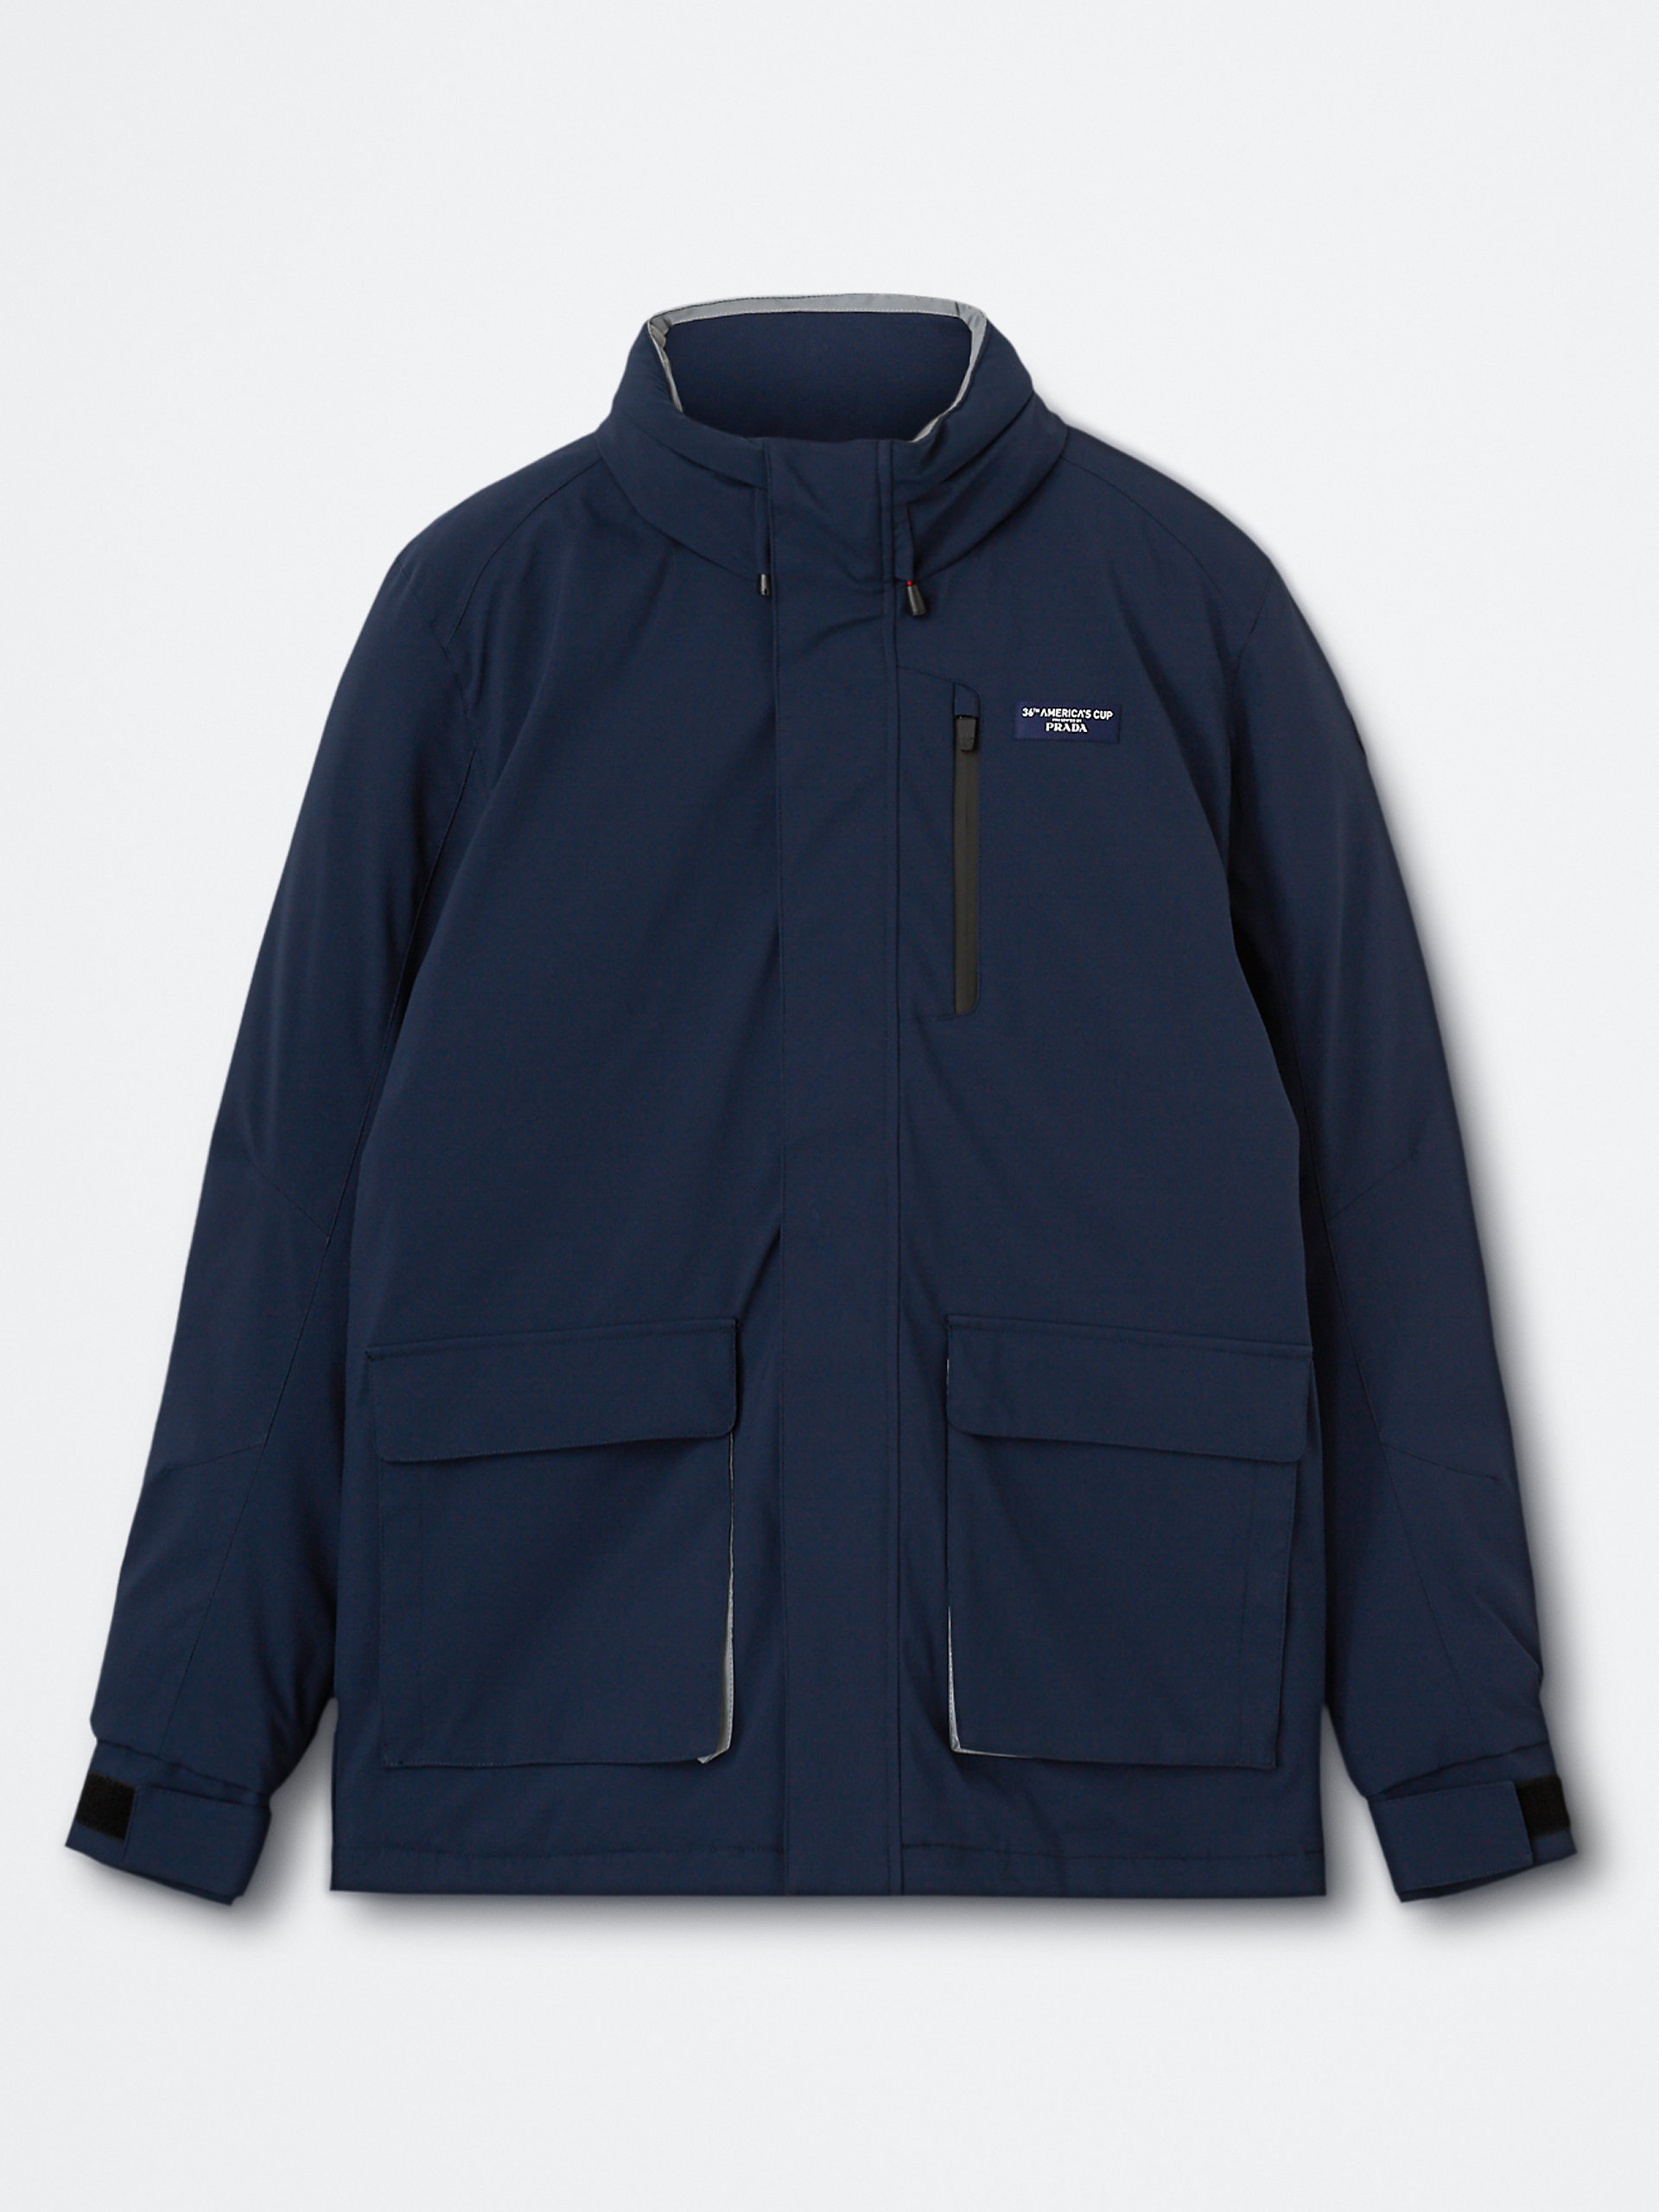 Nelson Jacket | AC36 By Prada | North Sails Collection